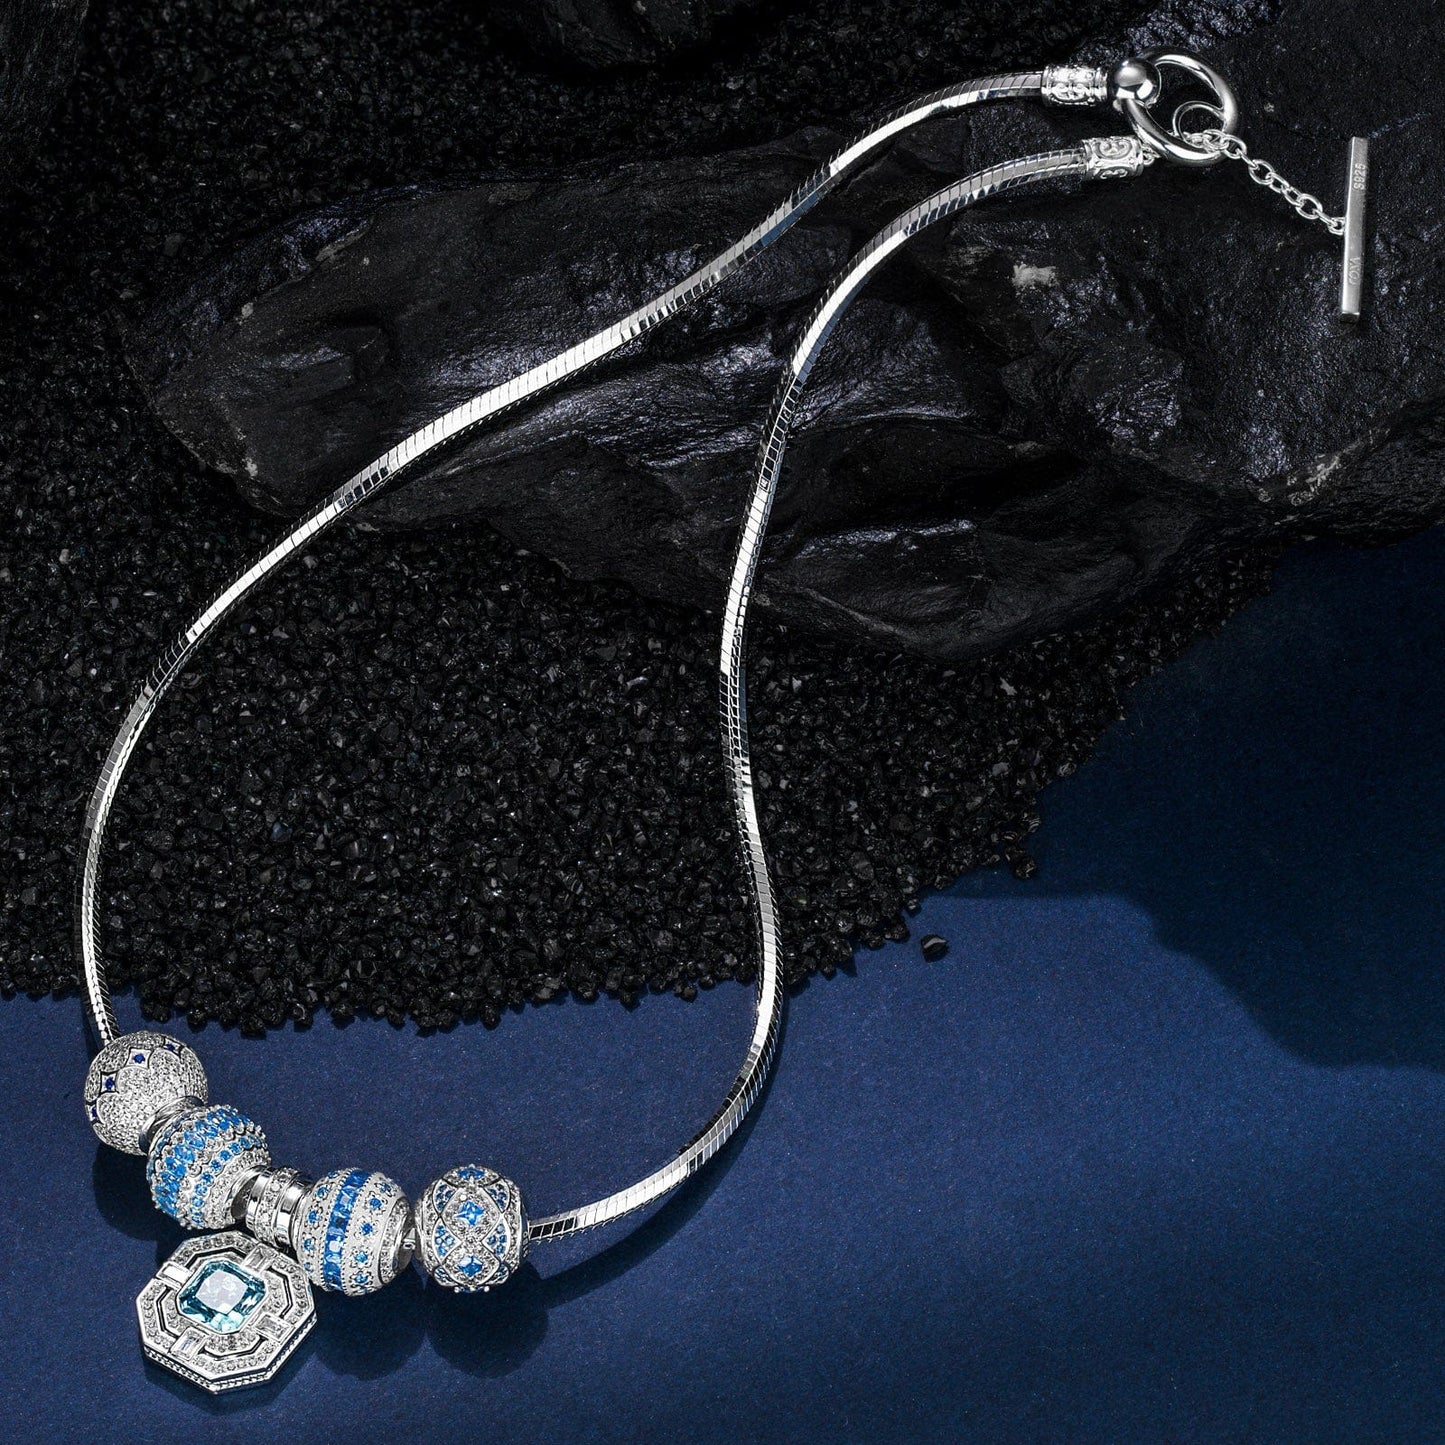 Sterling Silver Luminous Marine Charms Necklace Set In White Gold Plated